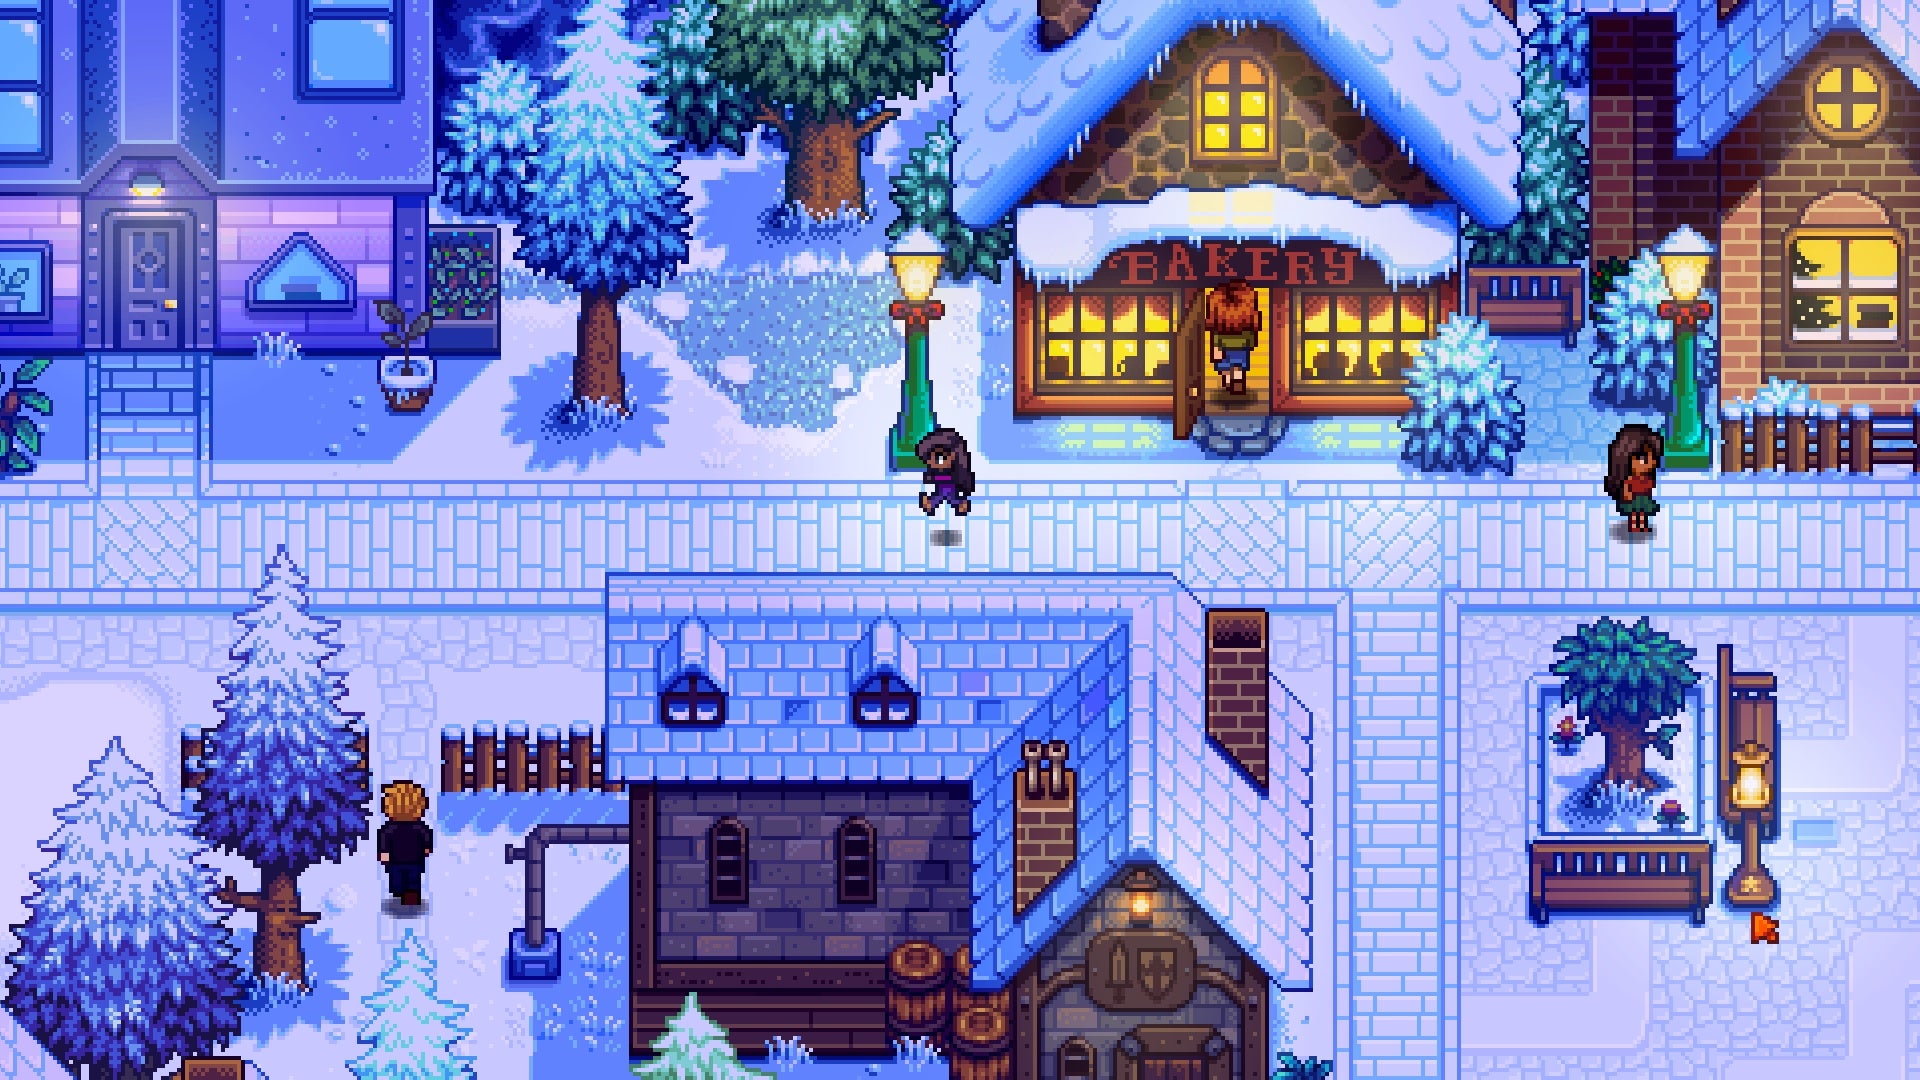 A screenshot of Haunted Chocolatier, the new game from the developer of Stardew Valley, showing a character in a snowy town at night, walking outside a quaint and cosy bakery.